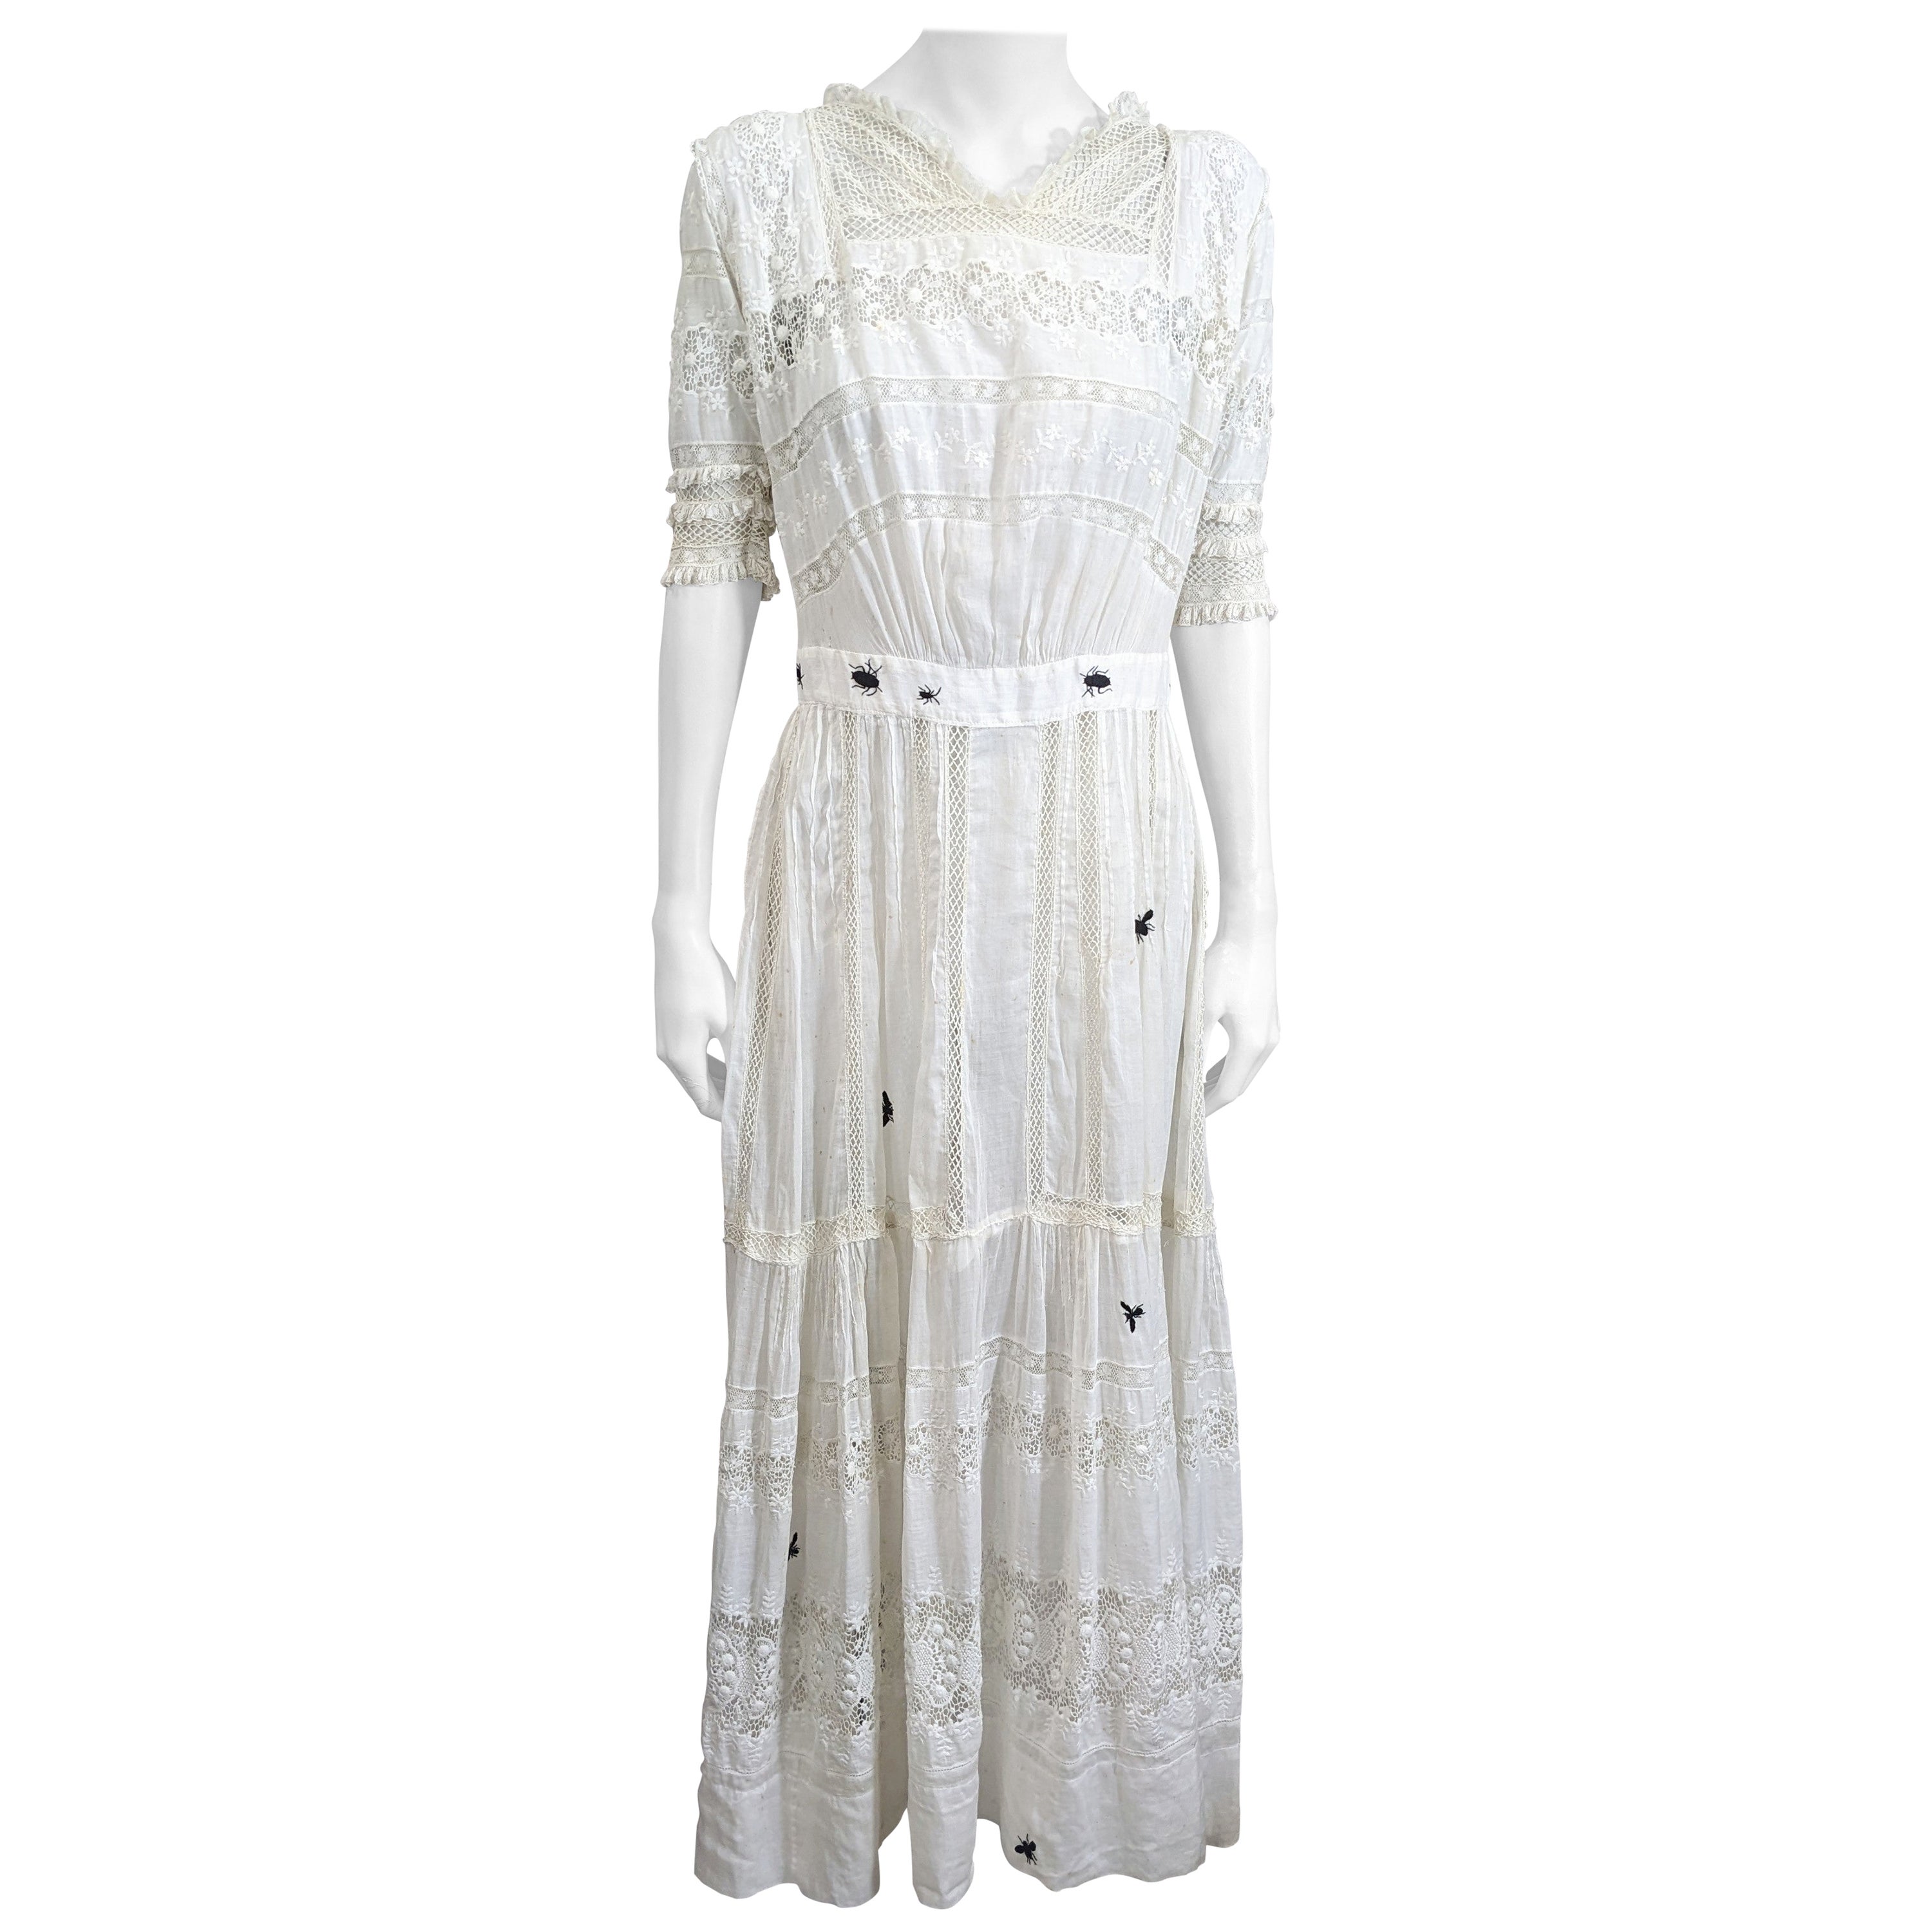 Victorian White Embroidered Dress, Upcycled Studio VL